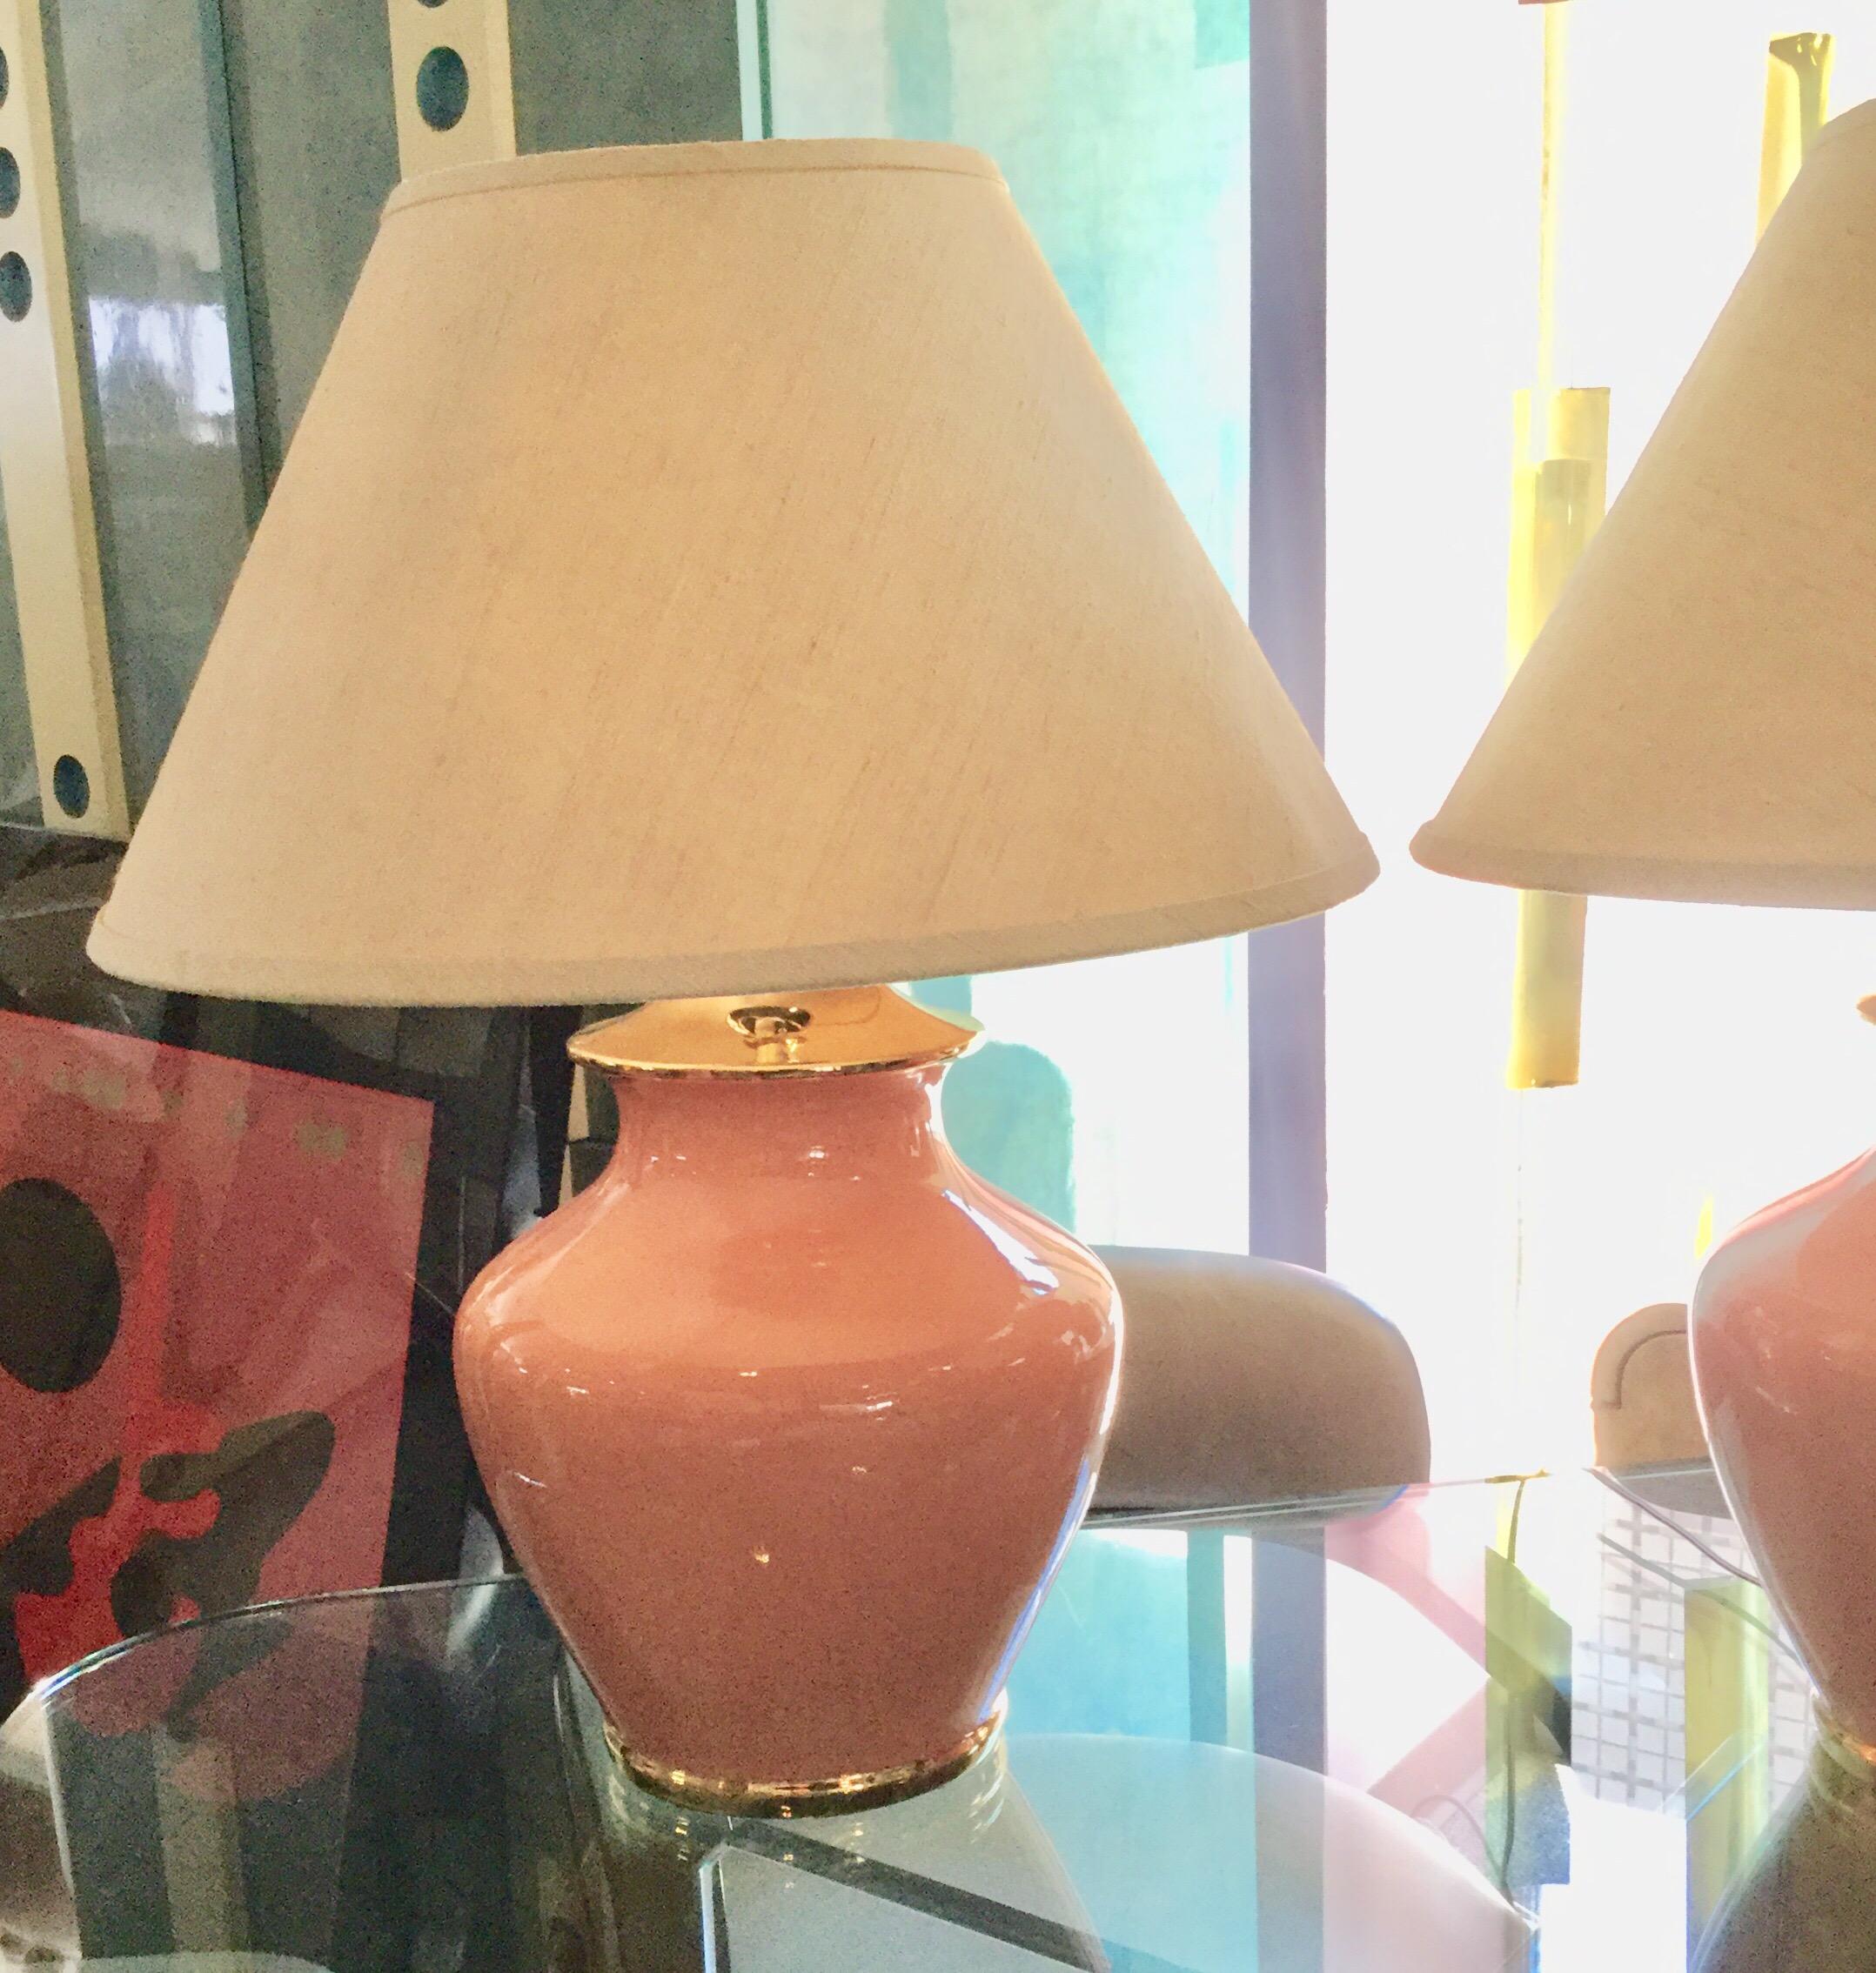 These are a pair of very glamorous Lamps from the vintage Palm Springs house designed it with great style in the early 1980s. The ceramic is a very desirable in current coral color with metallic gold ceramic trim. These beautiful lamps obtain their